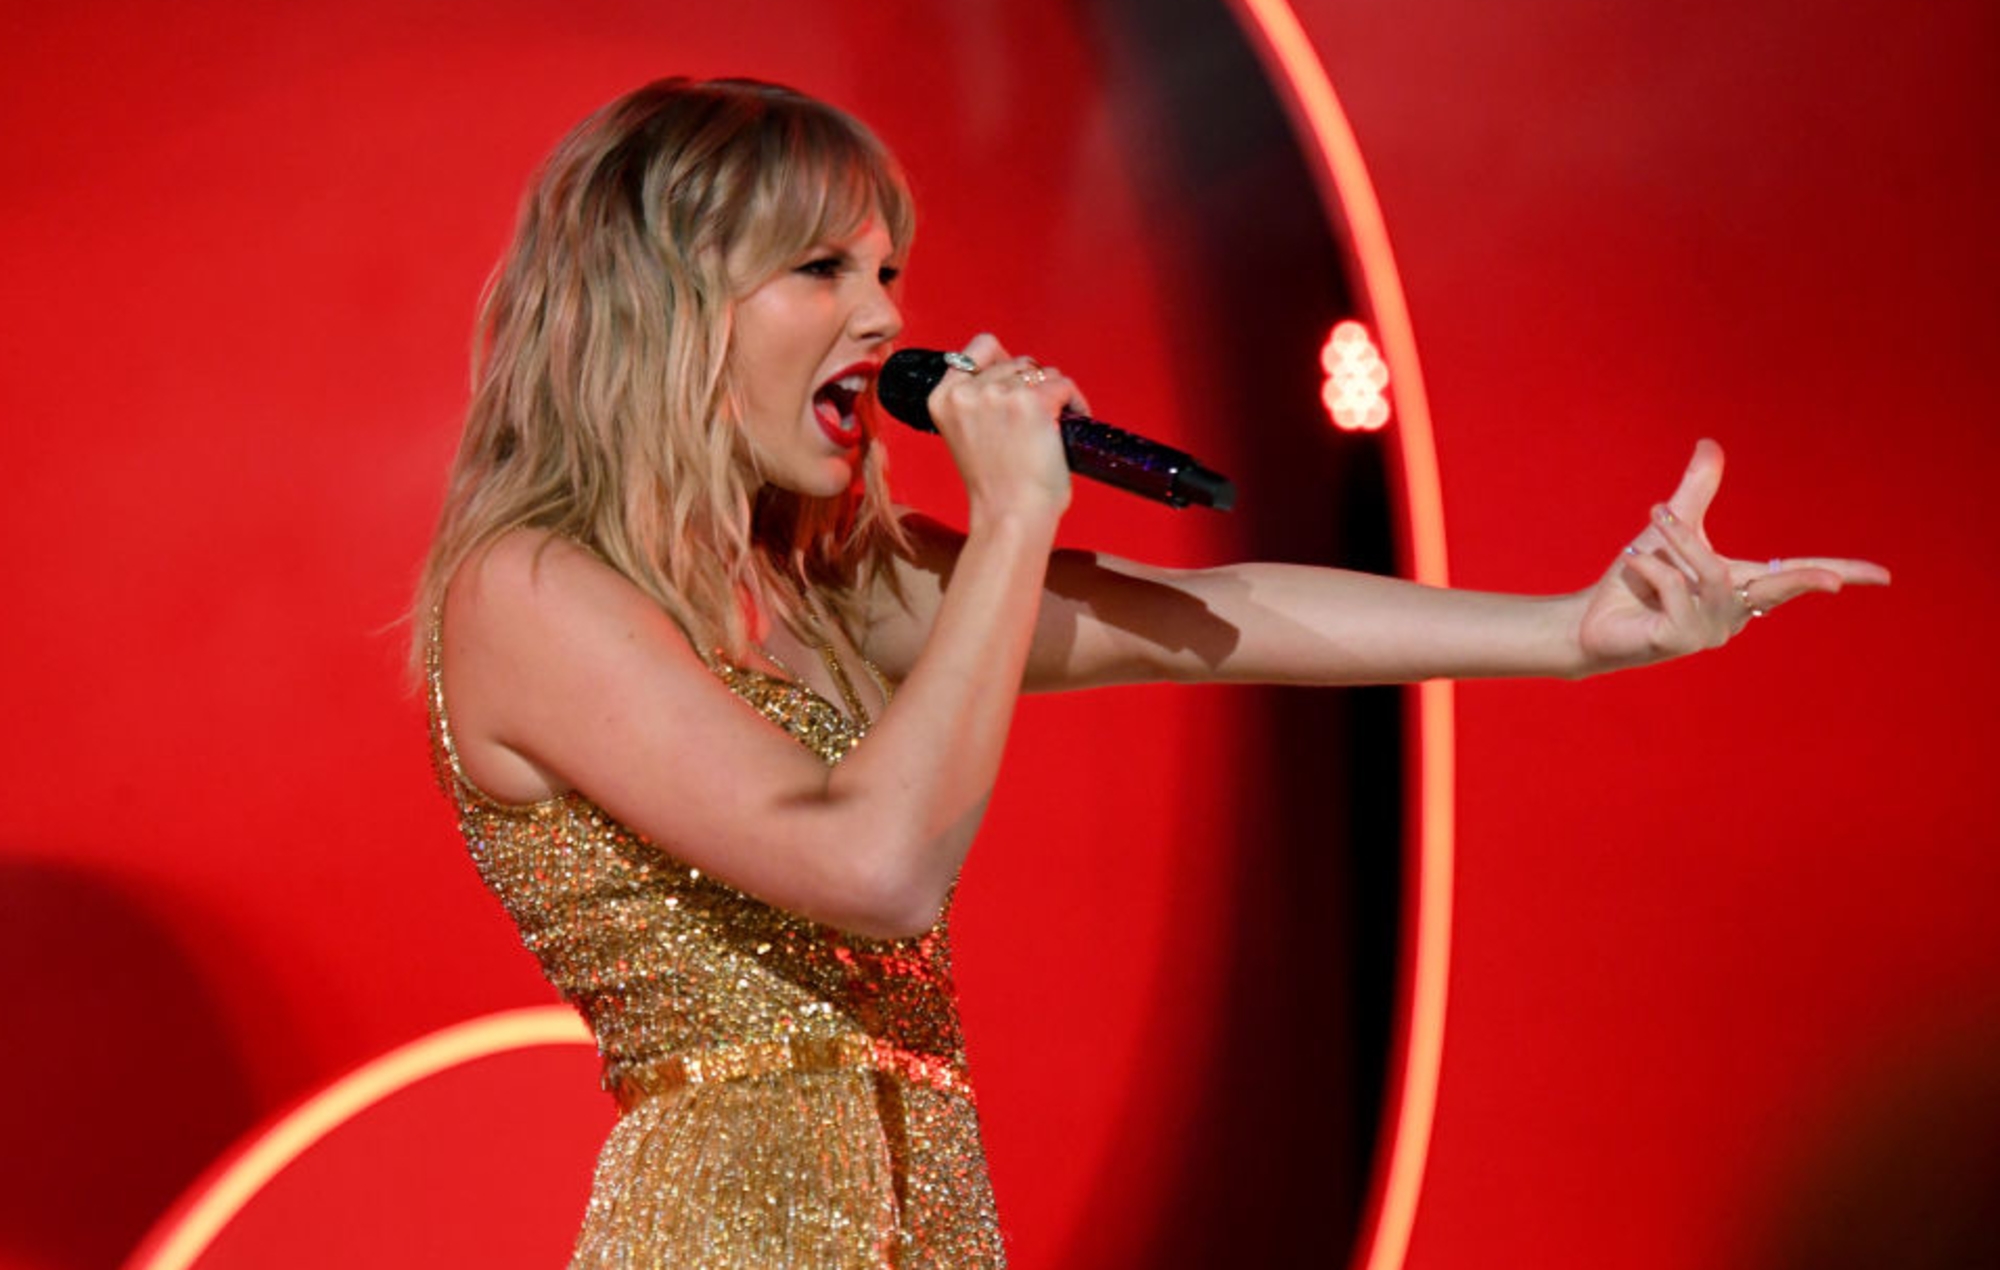 Taylor Swift video prompts rumours for 'Red (Taylor's Version)' bonus track